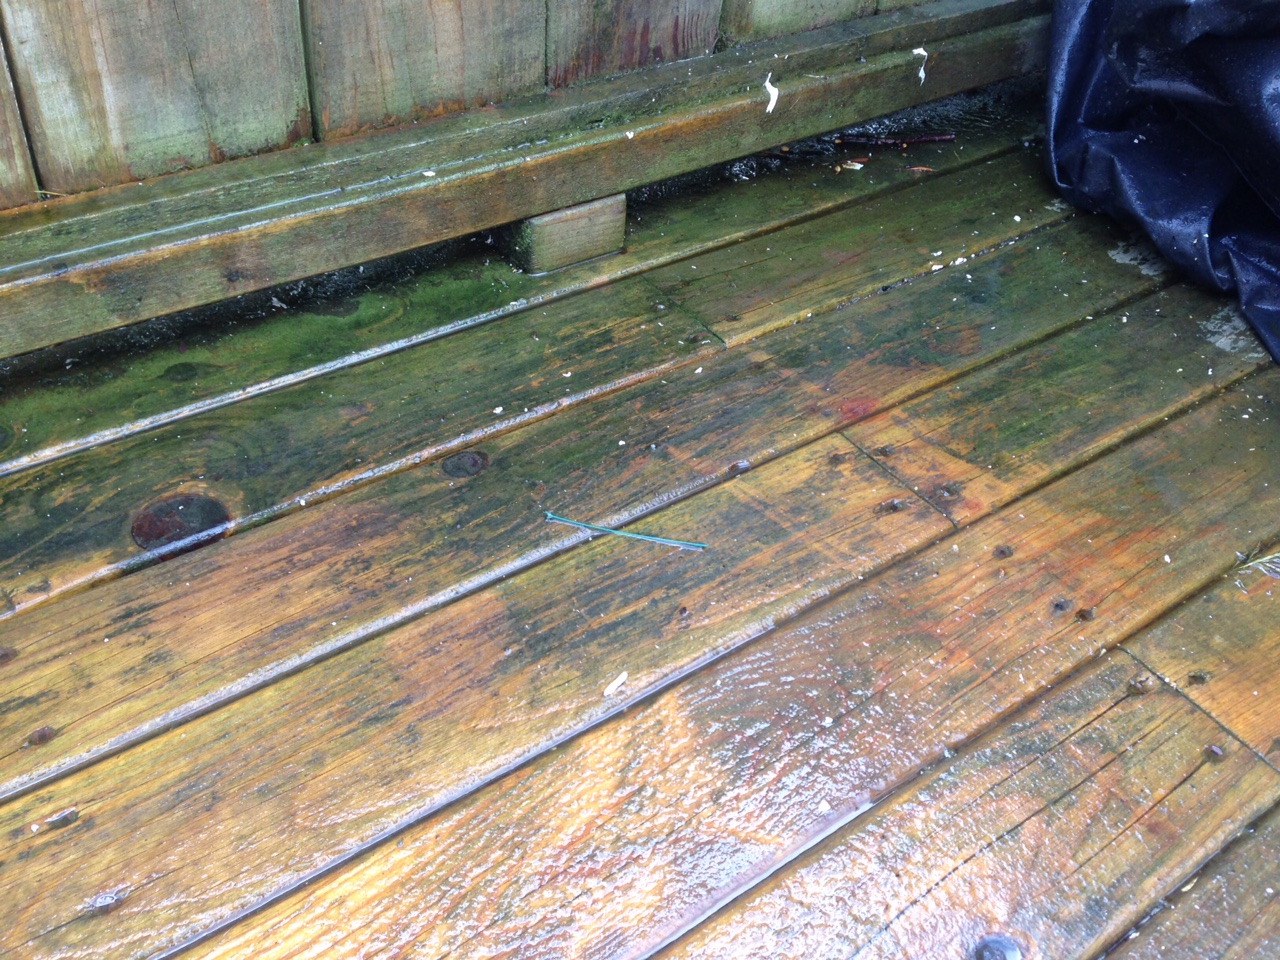 How to remove green mold from a wood deck